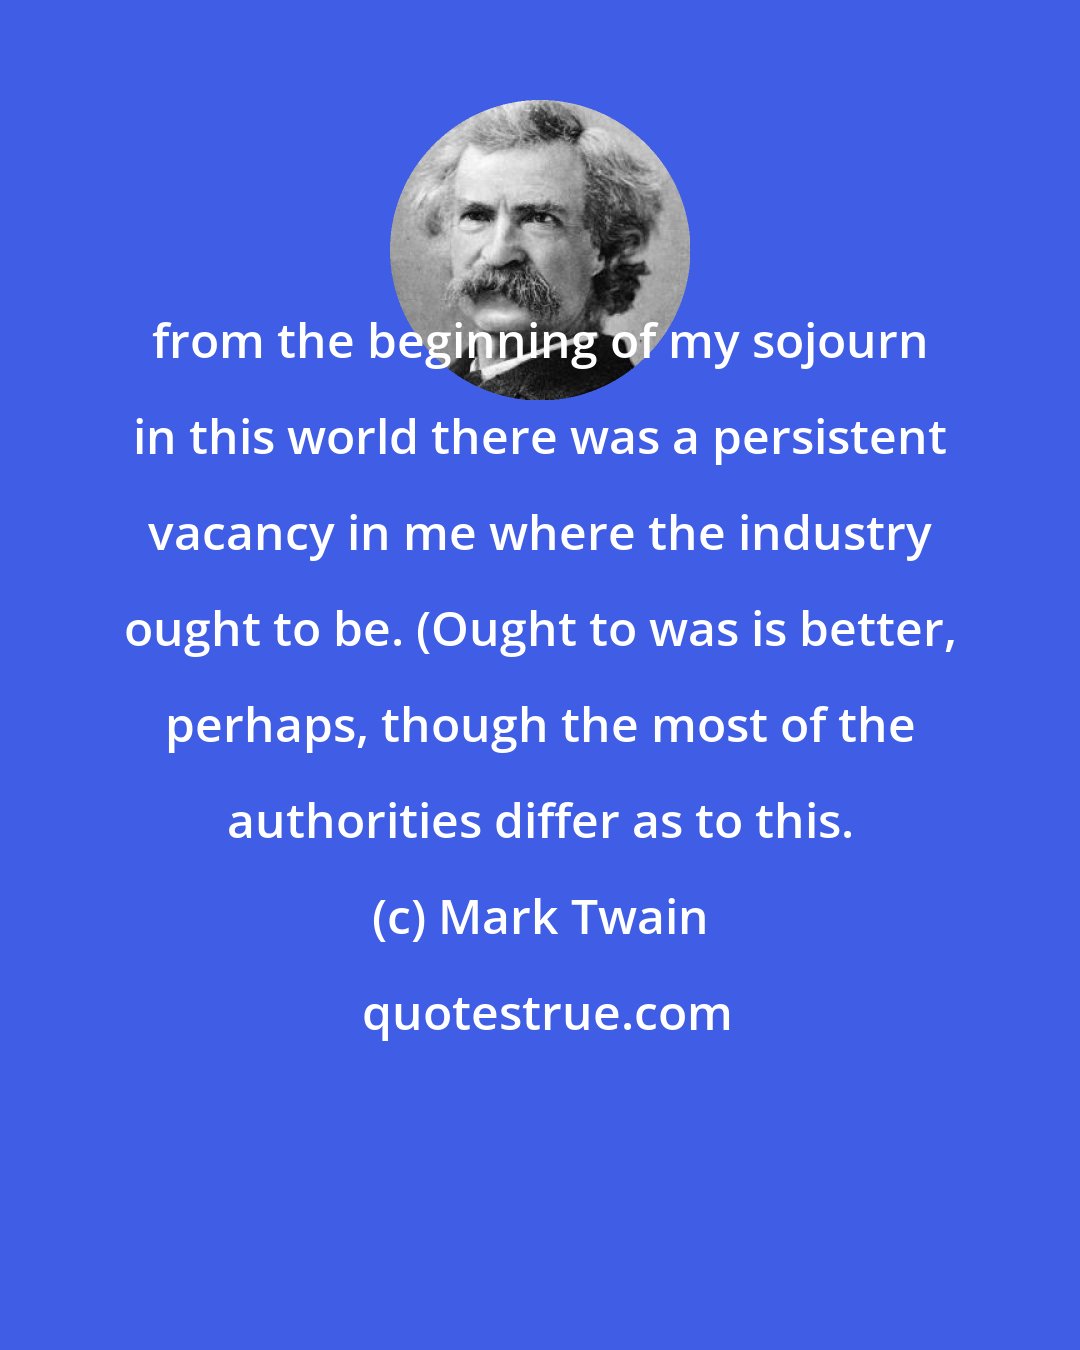 Mark Twain: from the beginning of my sojourn in this world there was a persistent vacancy in me where the industry ought to be. (Ought to was is better, perhaps, though the most of the authorities differ as to this.